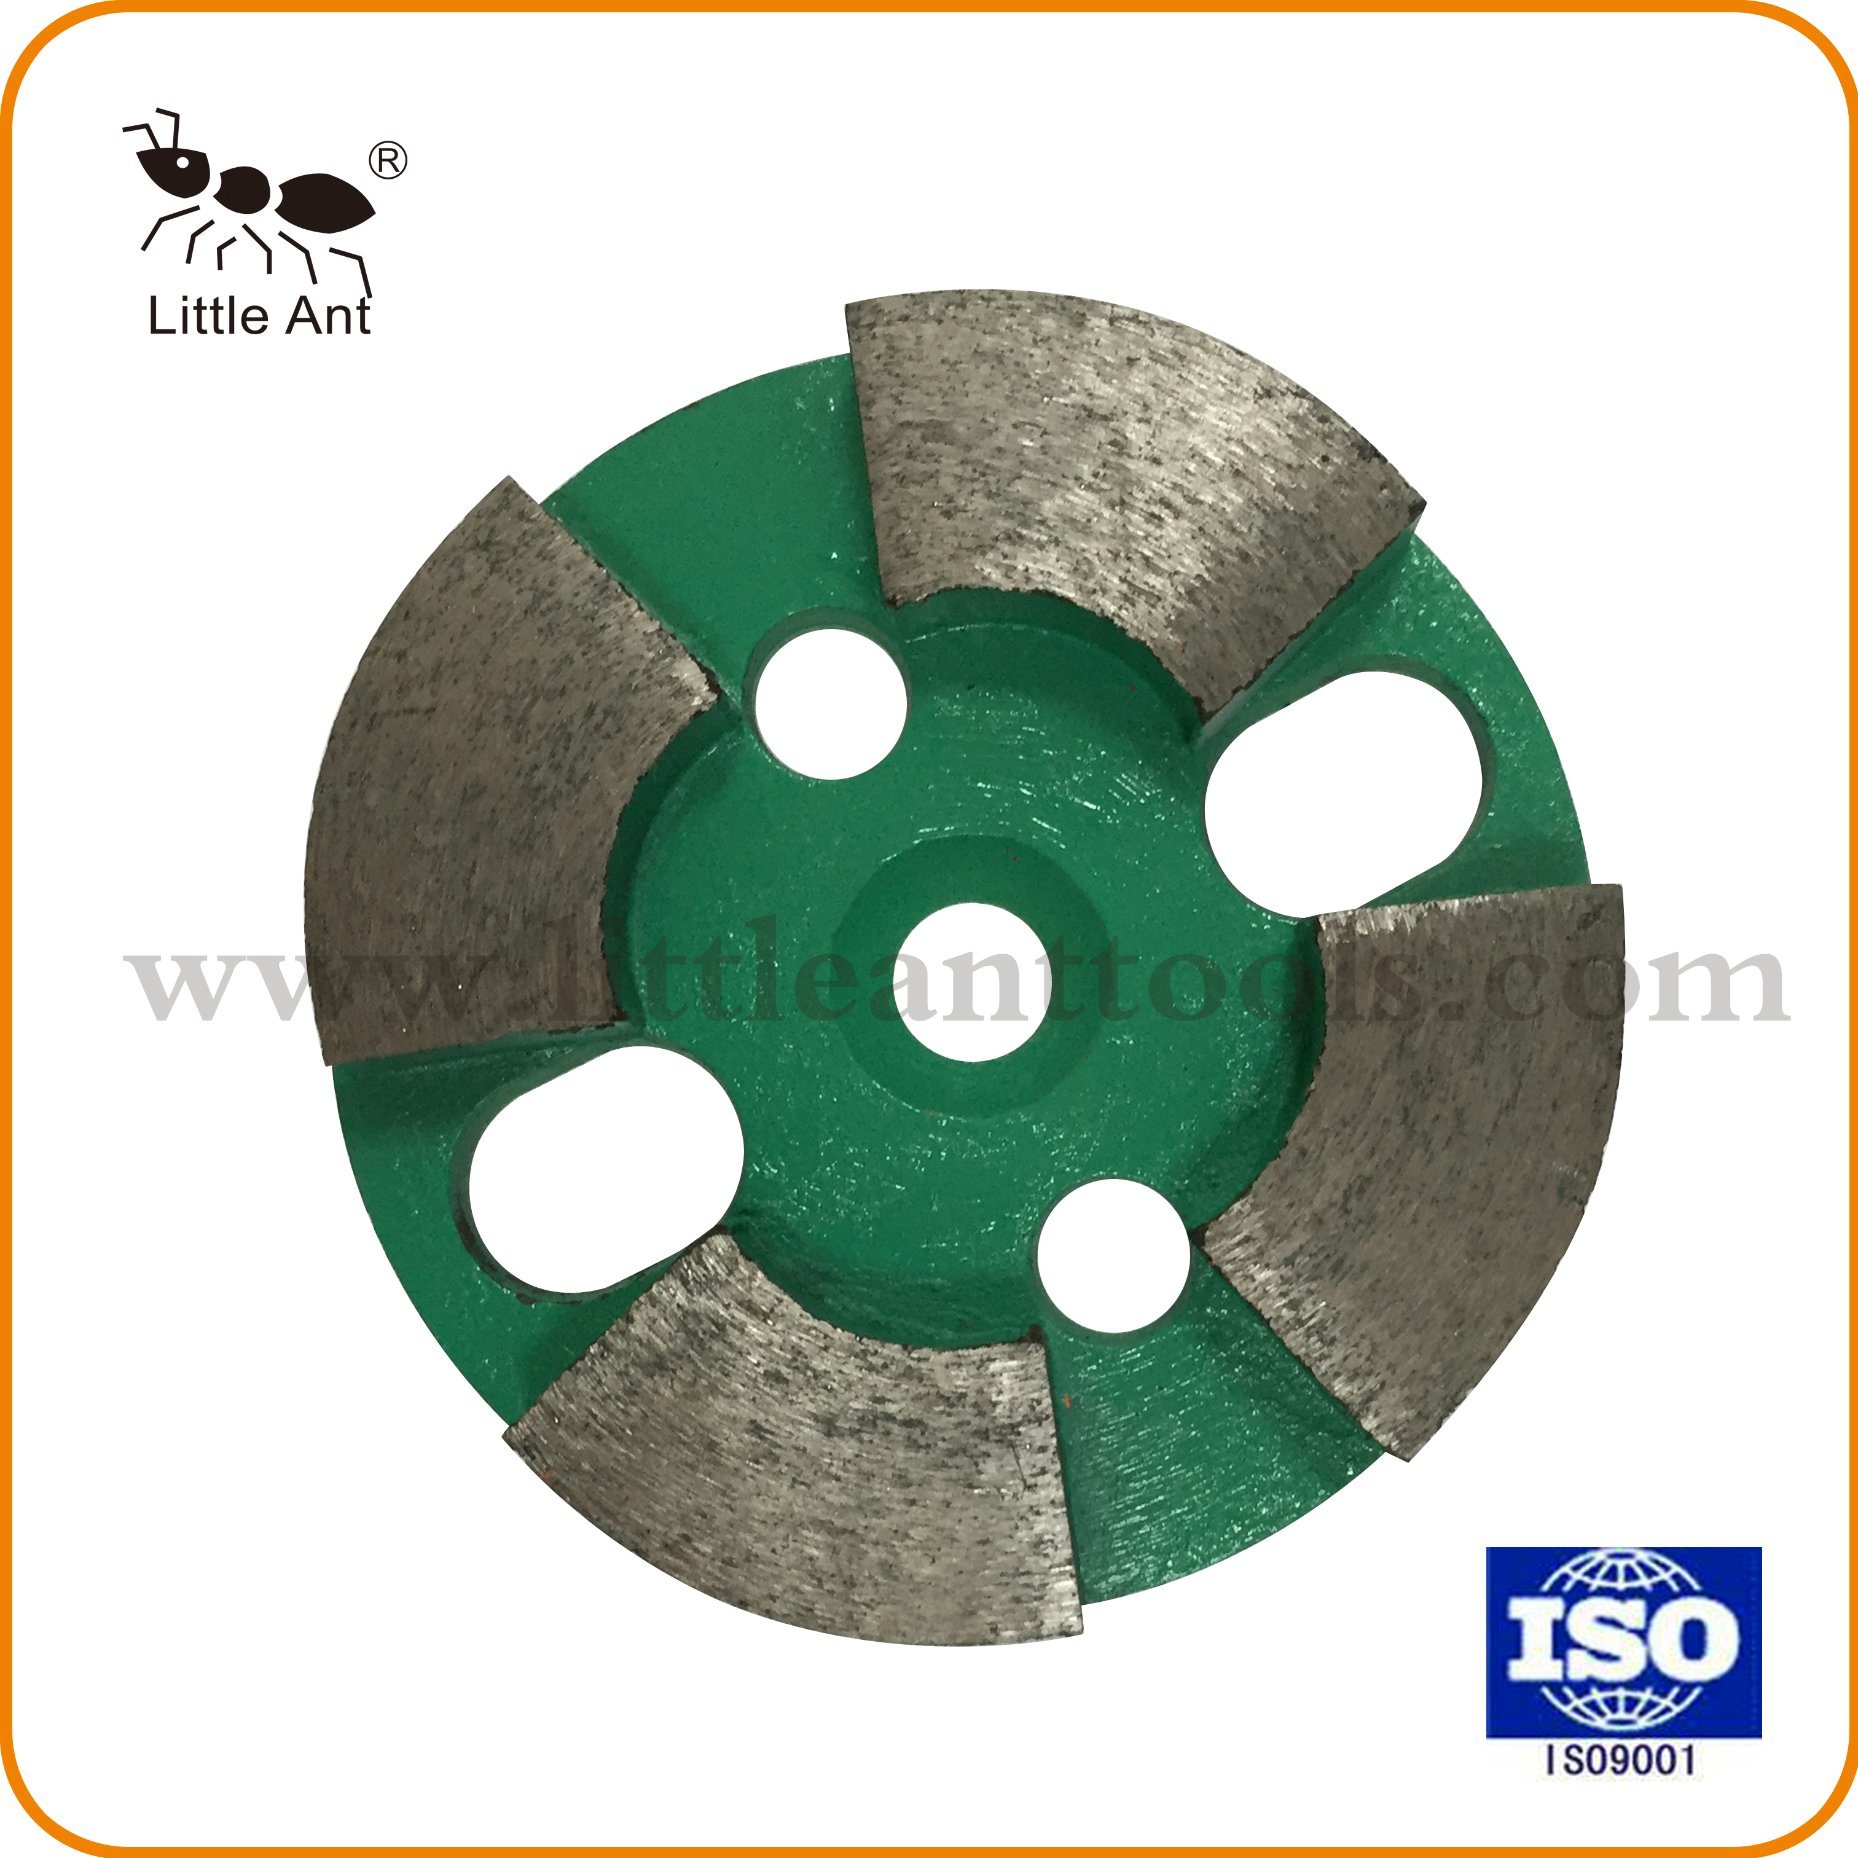 Metal Diamond Tool Grinding Wheel Abrasive Plate for Concrete & Cement Product 3